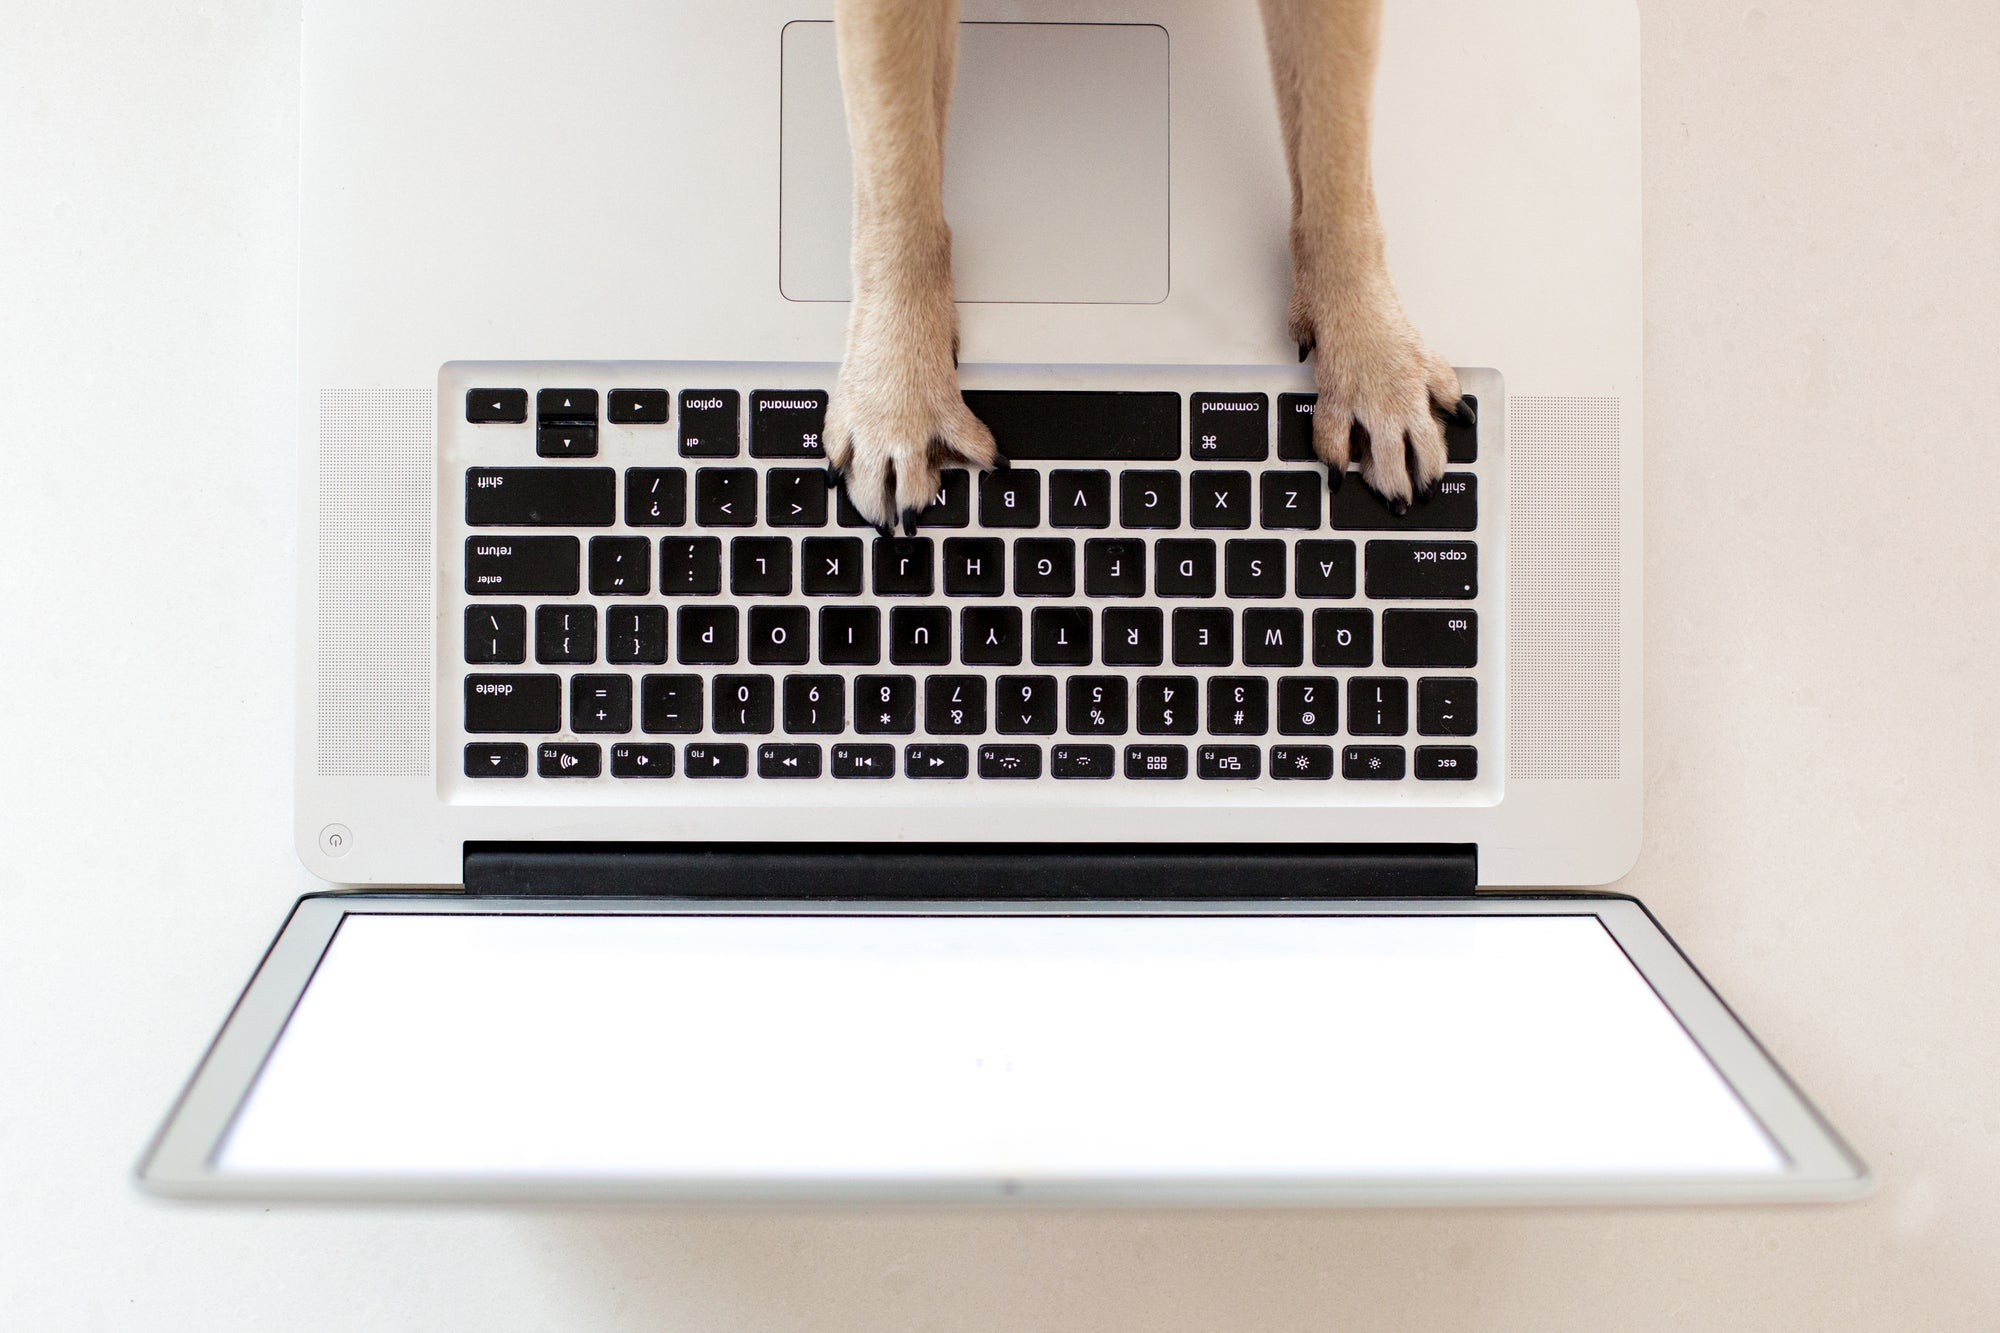 Dog paws on the keyboard of a white laptop from a bird's eye view